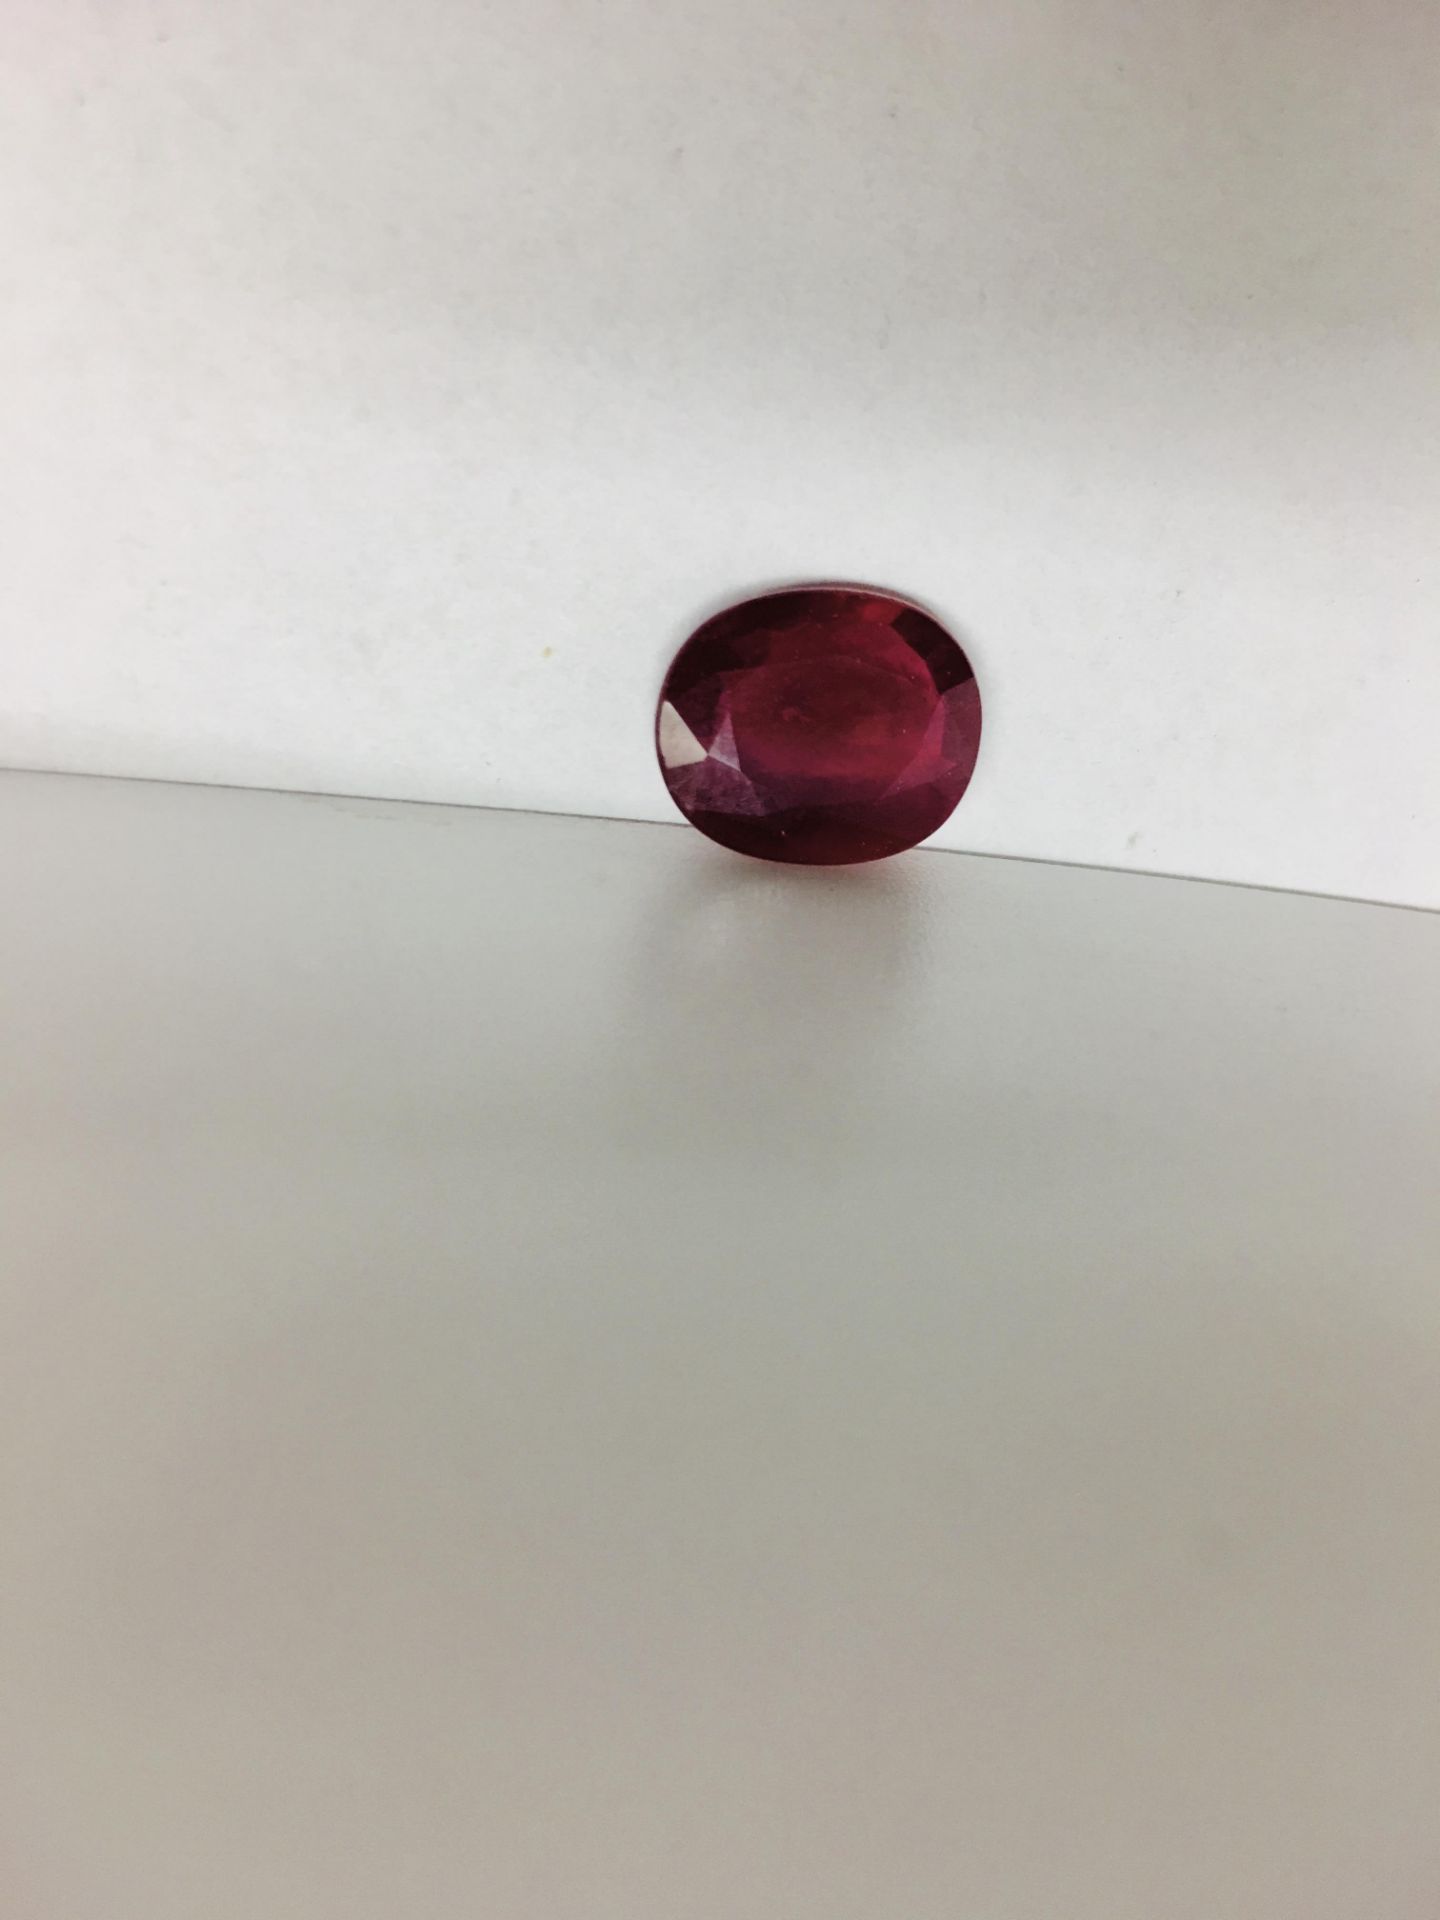 4.02ct ruby,Enhanced by Frature,good clarity and colour,12mmx10mm ,valued at 800 - Image 2 of 4